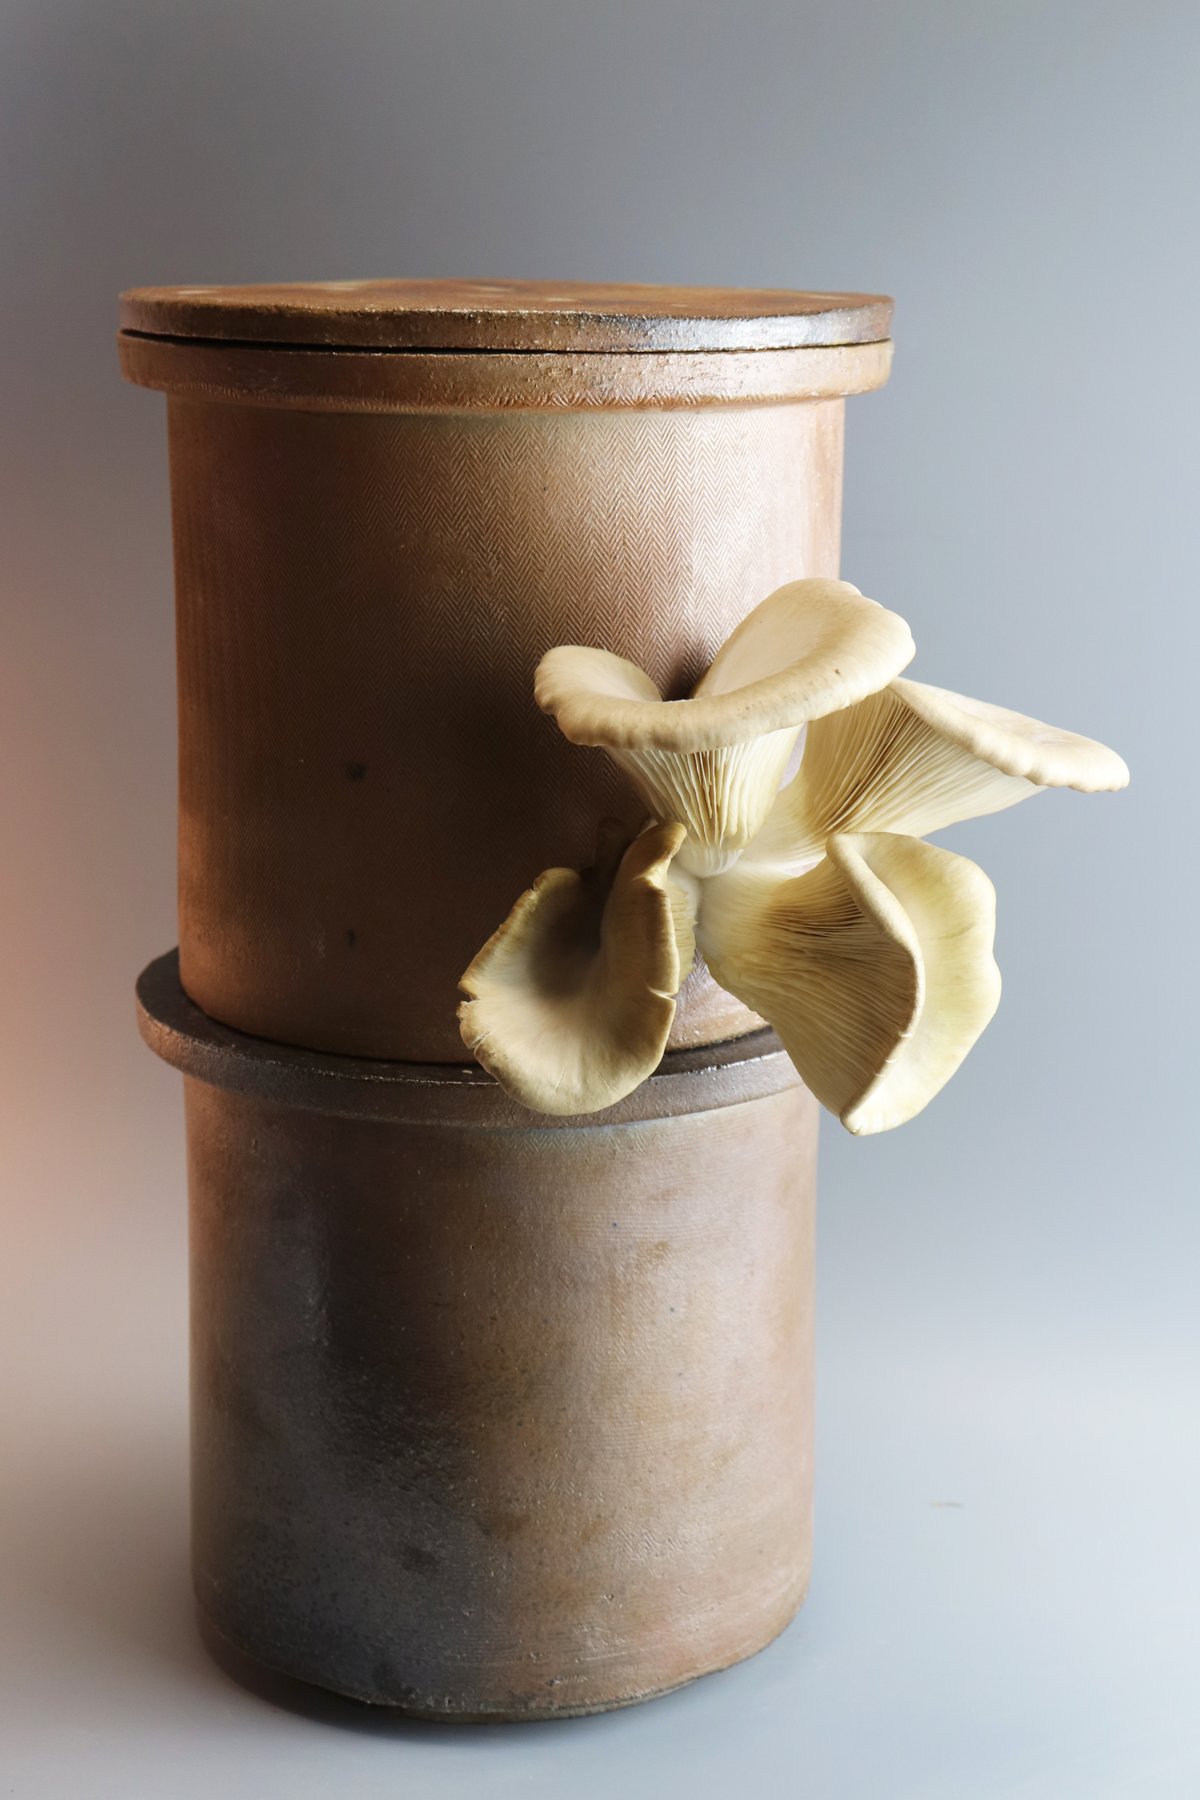 Image of Outdoor mushroom growing pot with lid